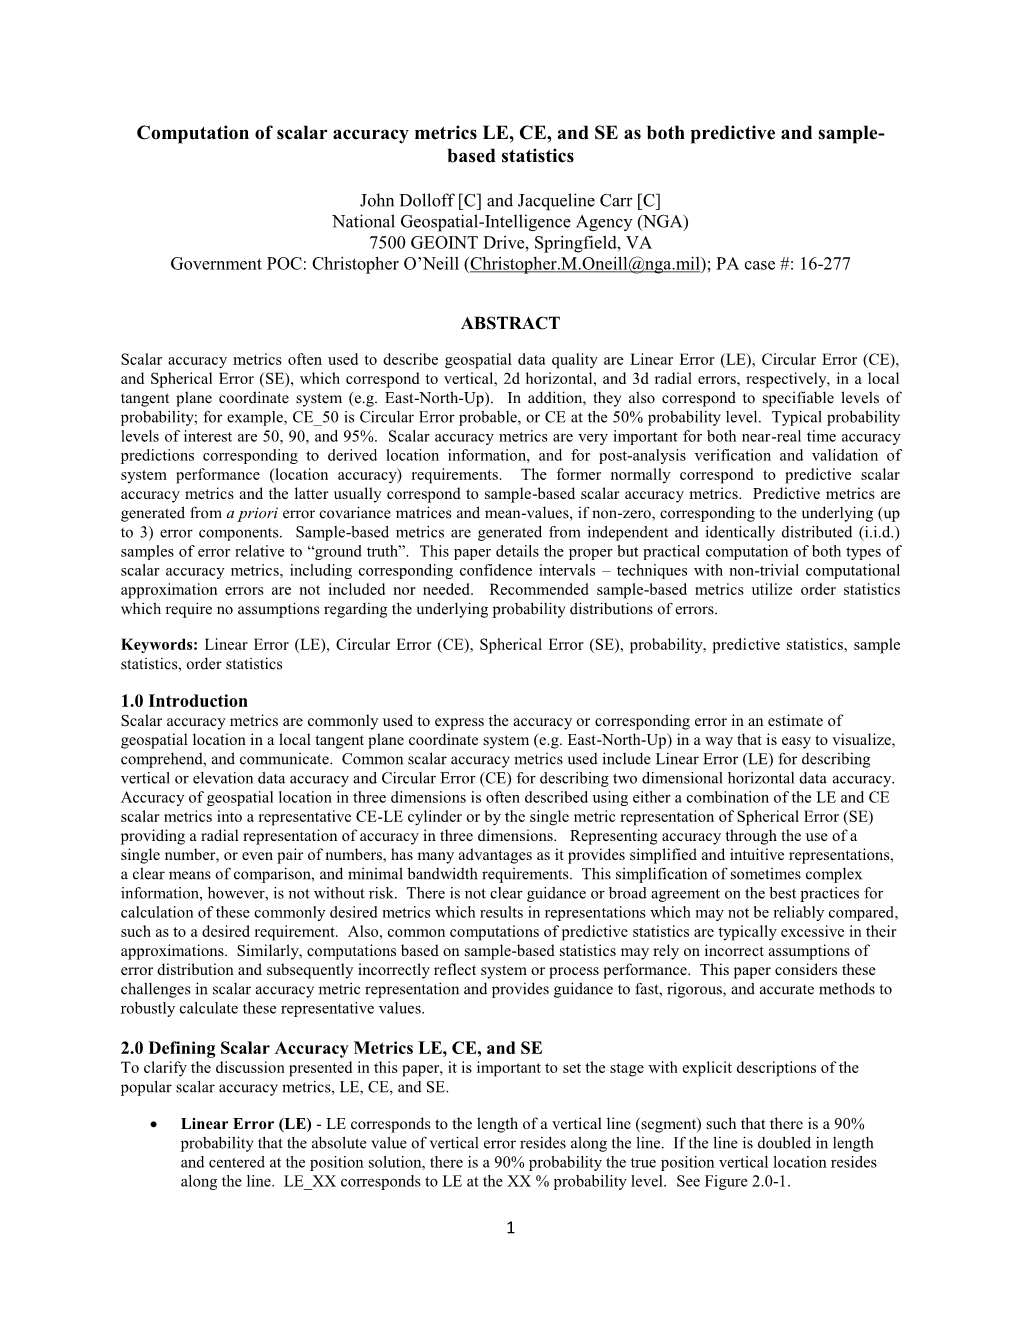 Computation of Scalar Accuracy Metrics LE, CE, and SE As Both Predictive and Sample- Based Statistics